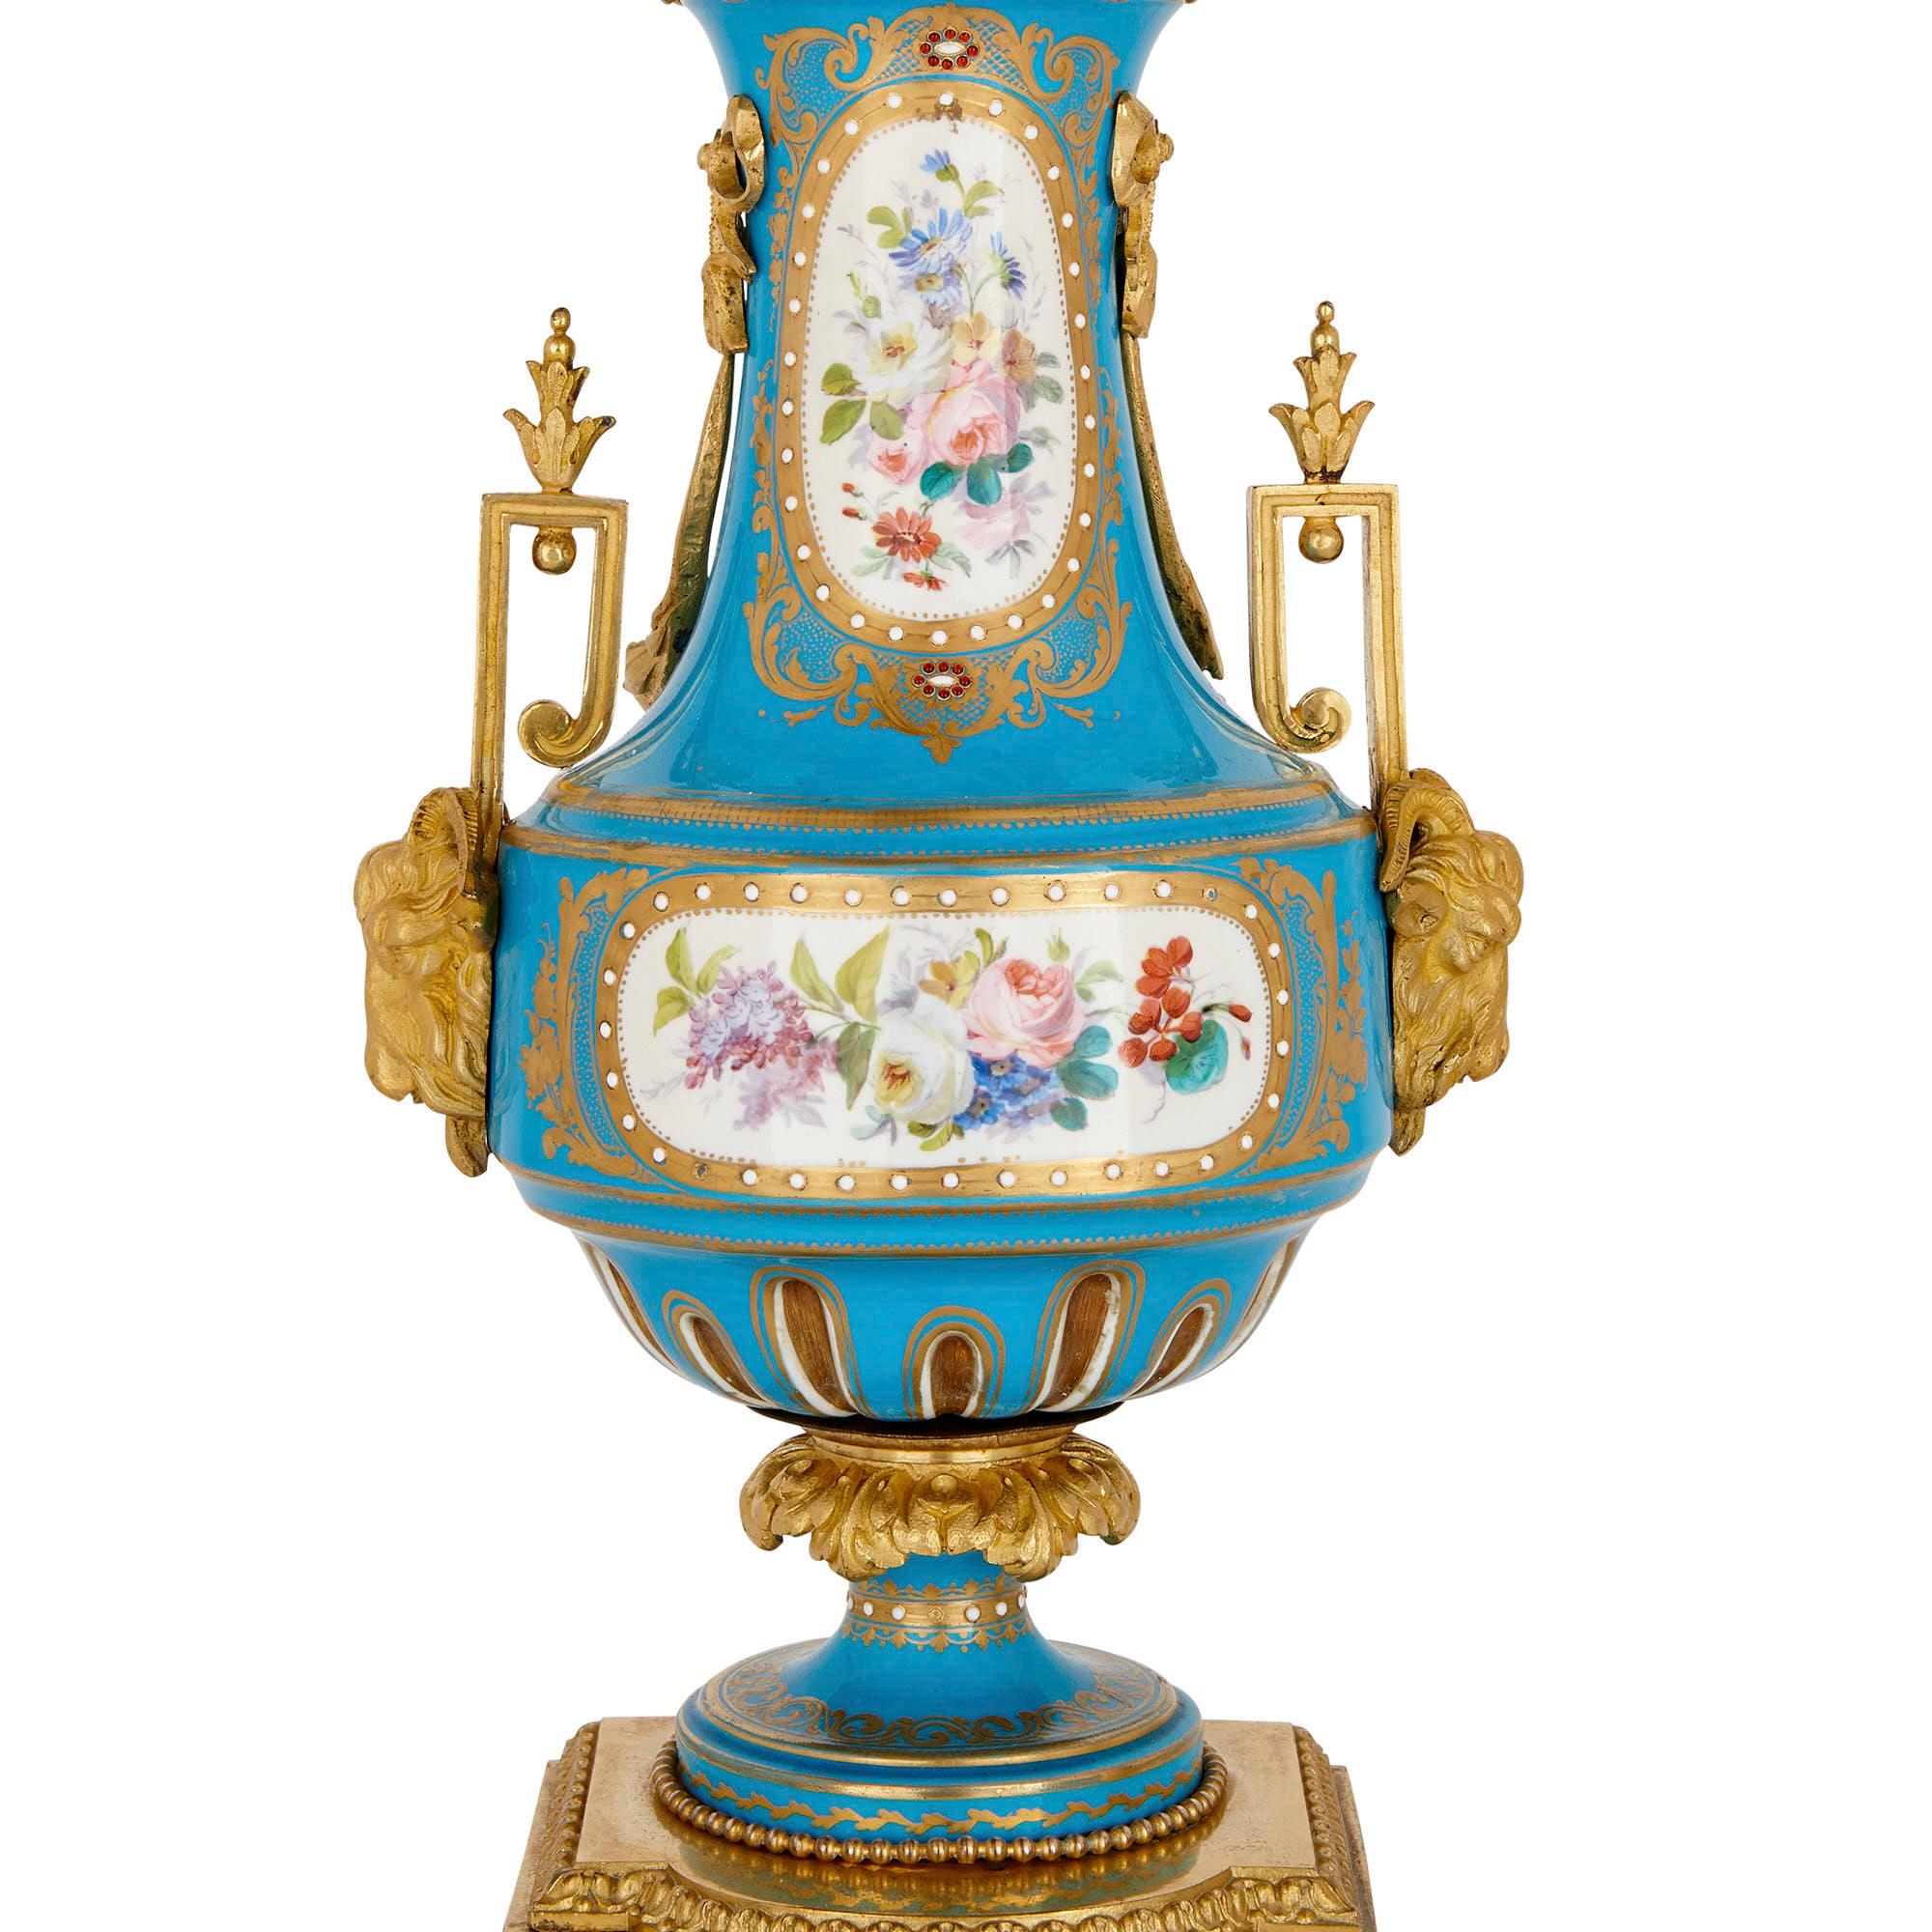 These wonderful porcelain candelabra were created in the 19th century, after Rococo style decorative arts of the 18th century. In their painted decoration, the candelabra are clearly inspired by Sèvres Porcelain Manufactory items.

Each candelabra